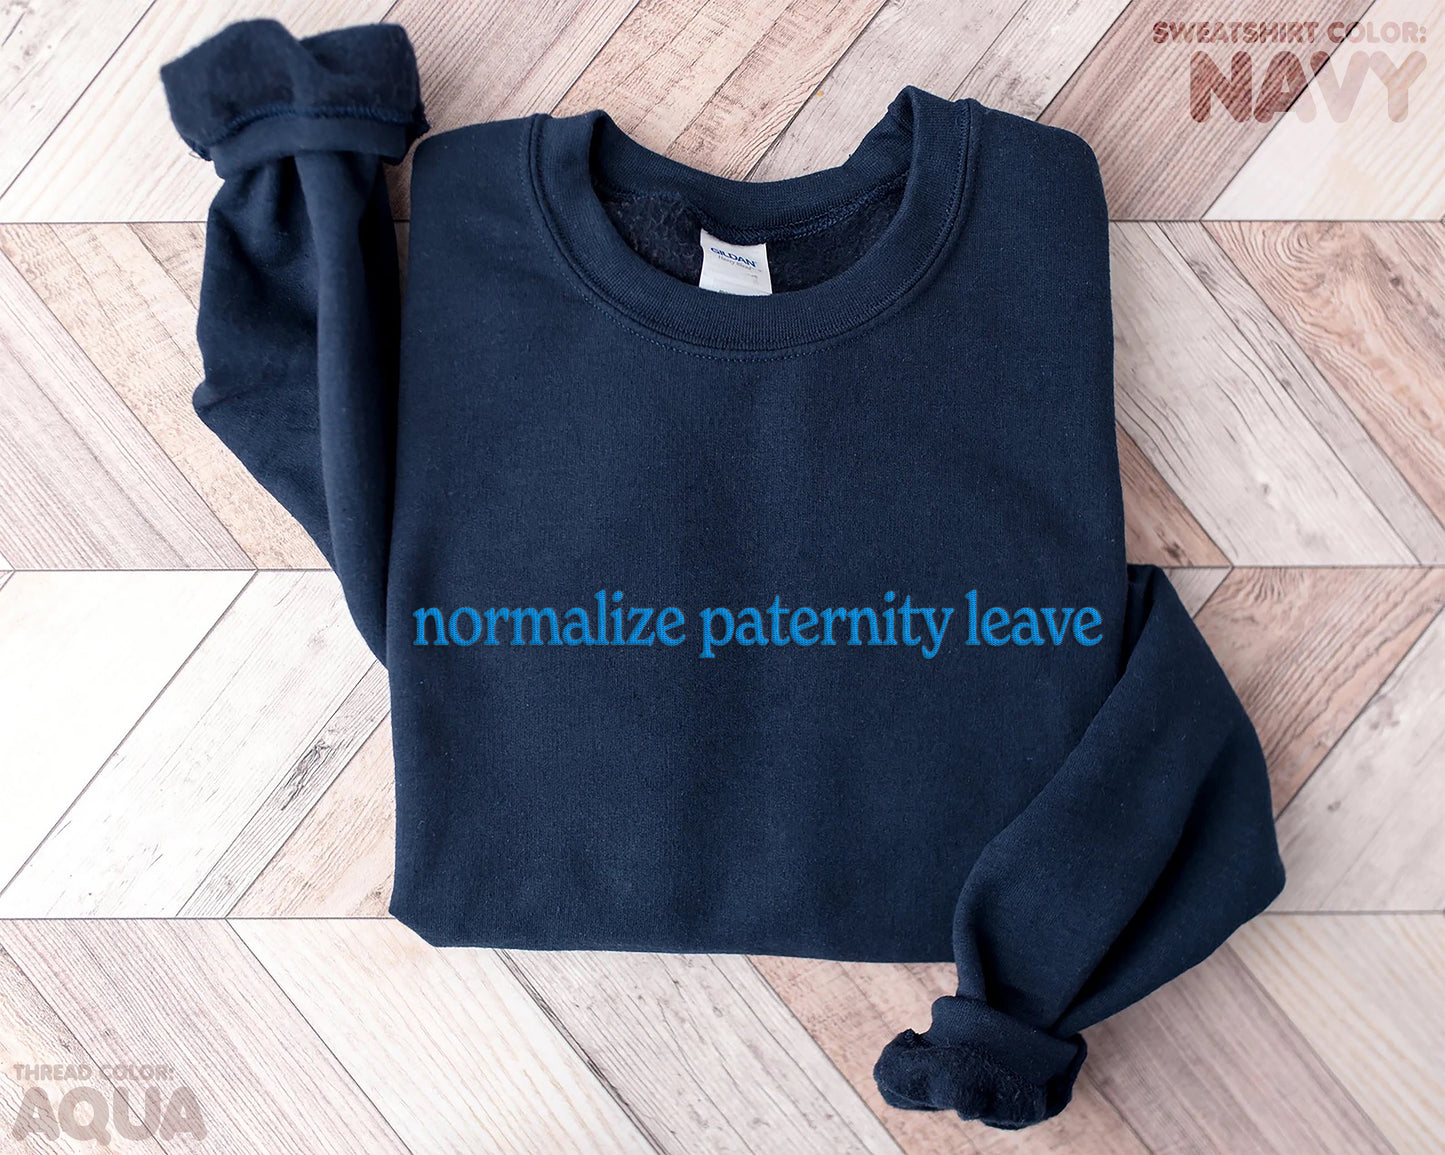 "normalize paternity leave" embroidered sweatshirt - funravel